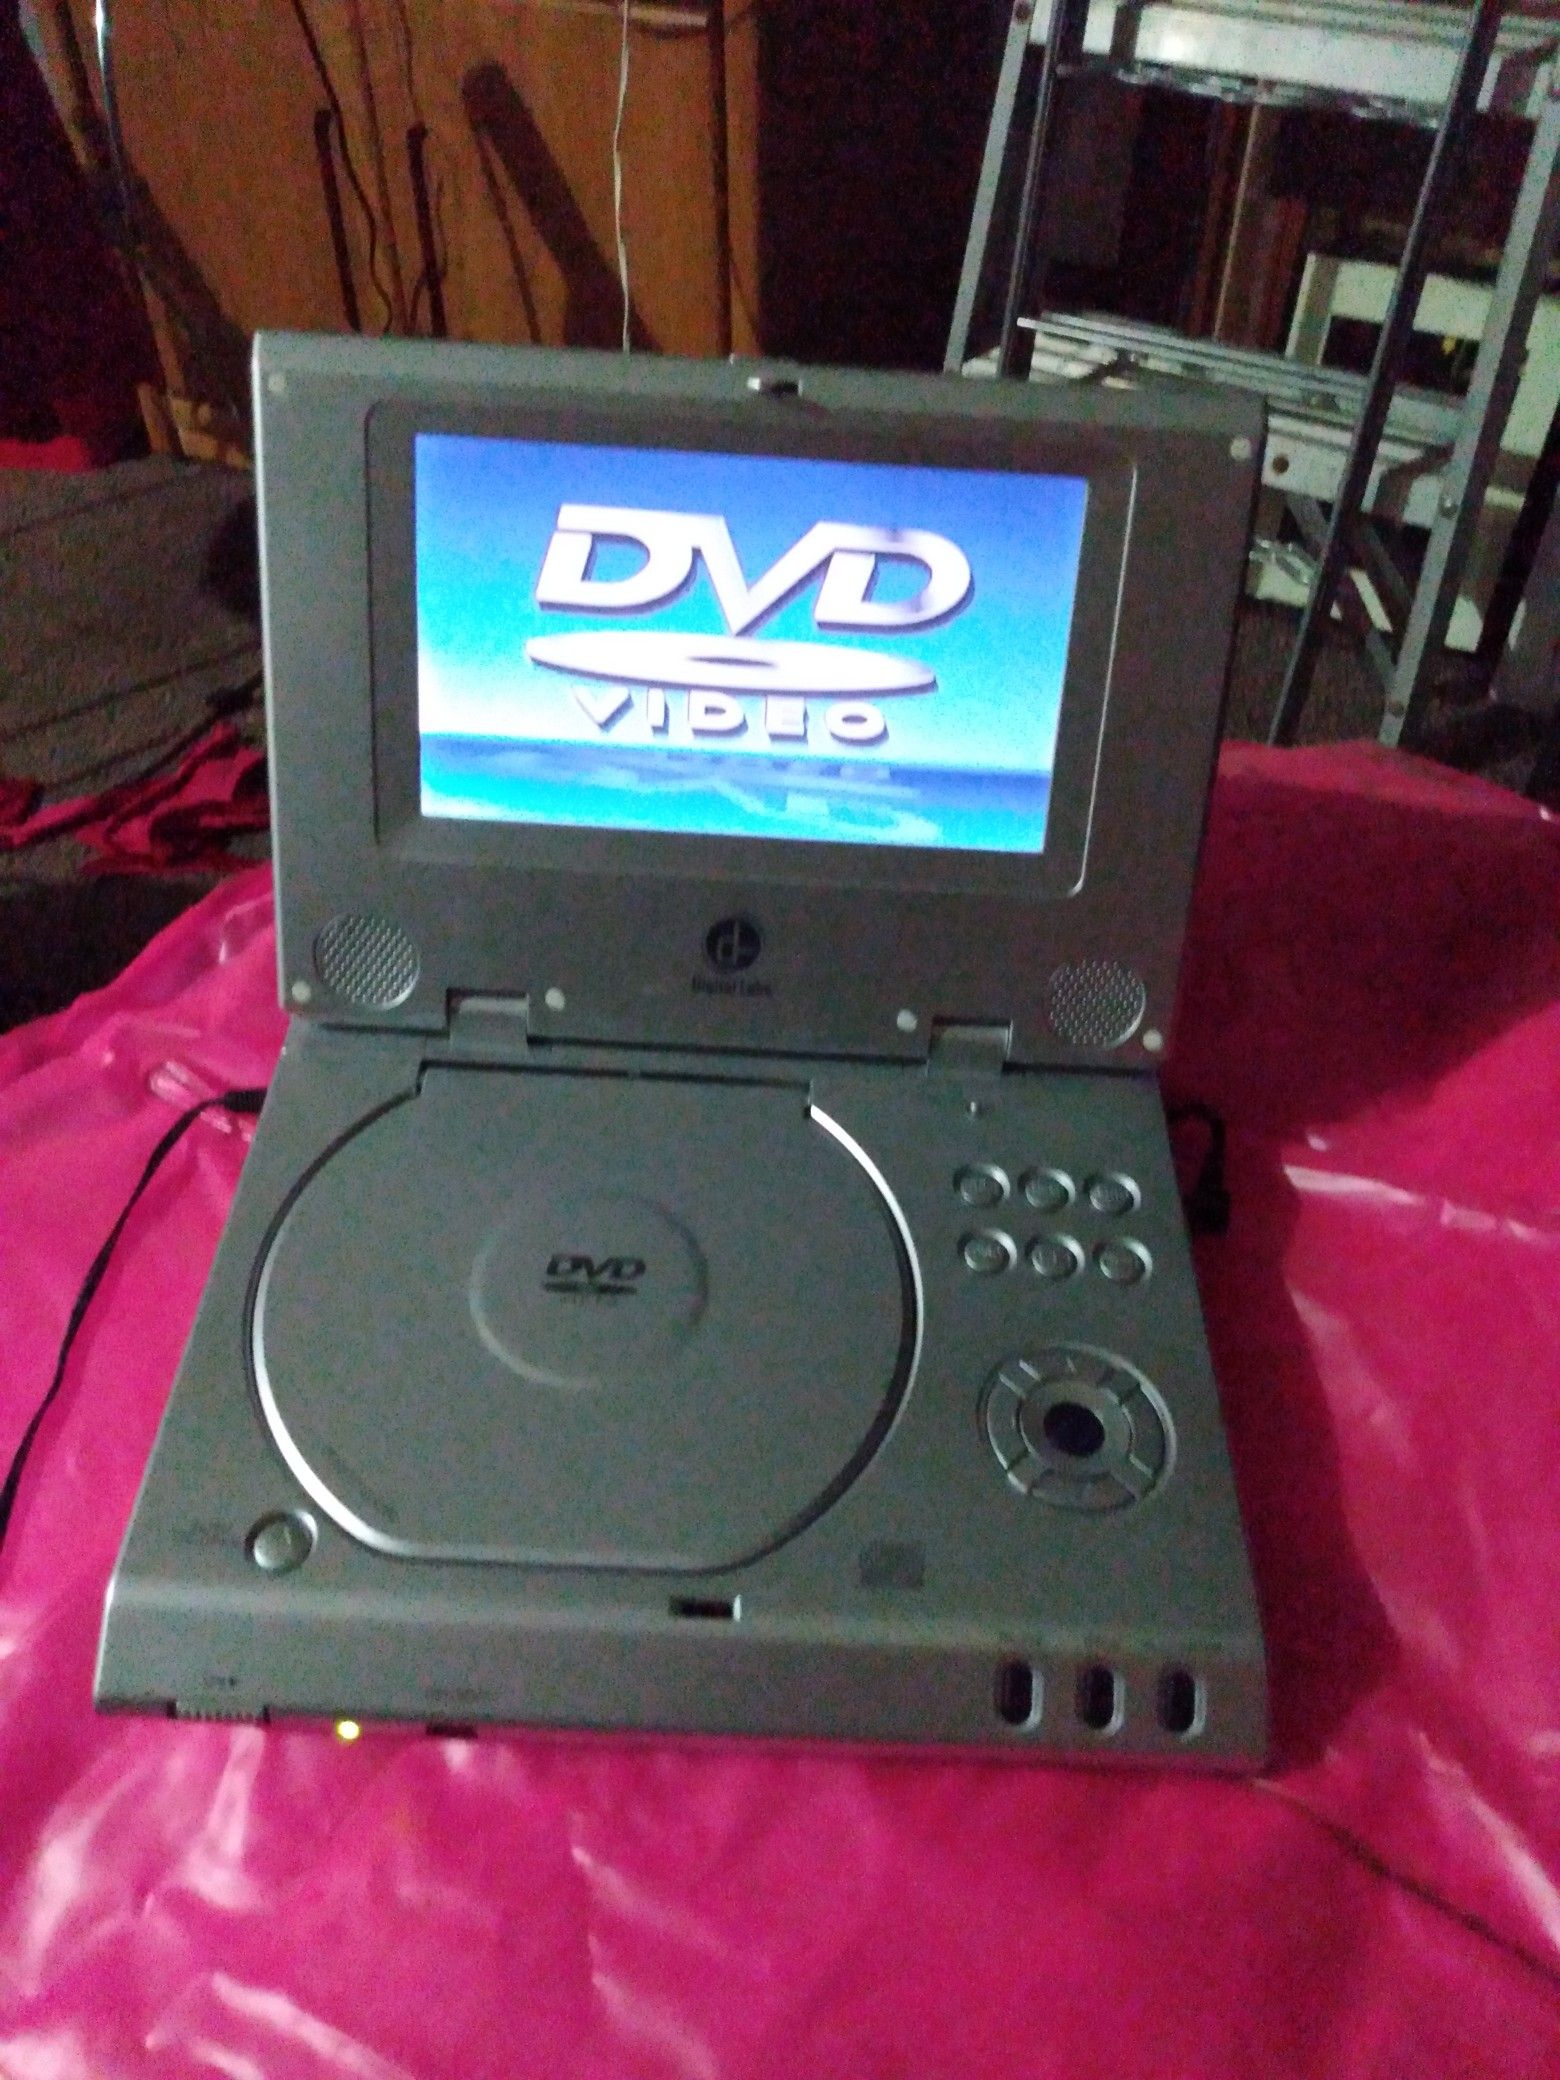 Dvd player, the volume is very low.